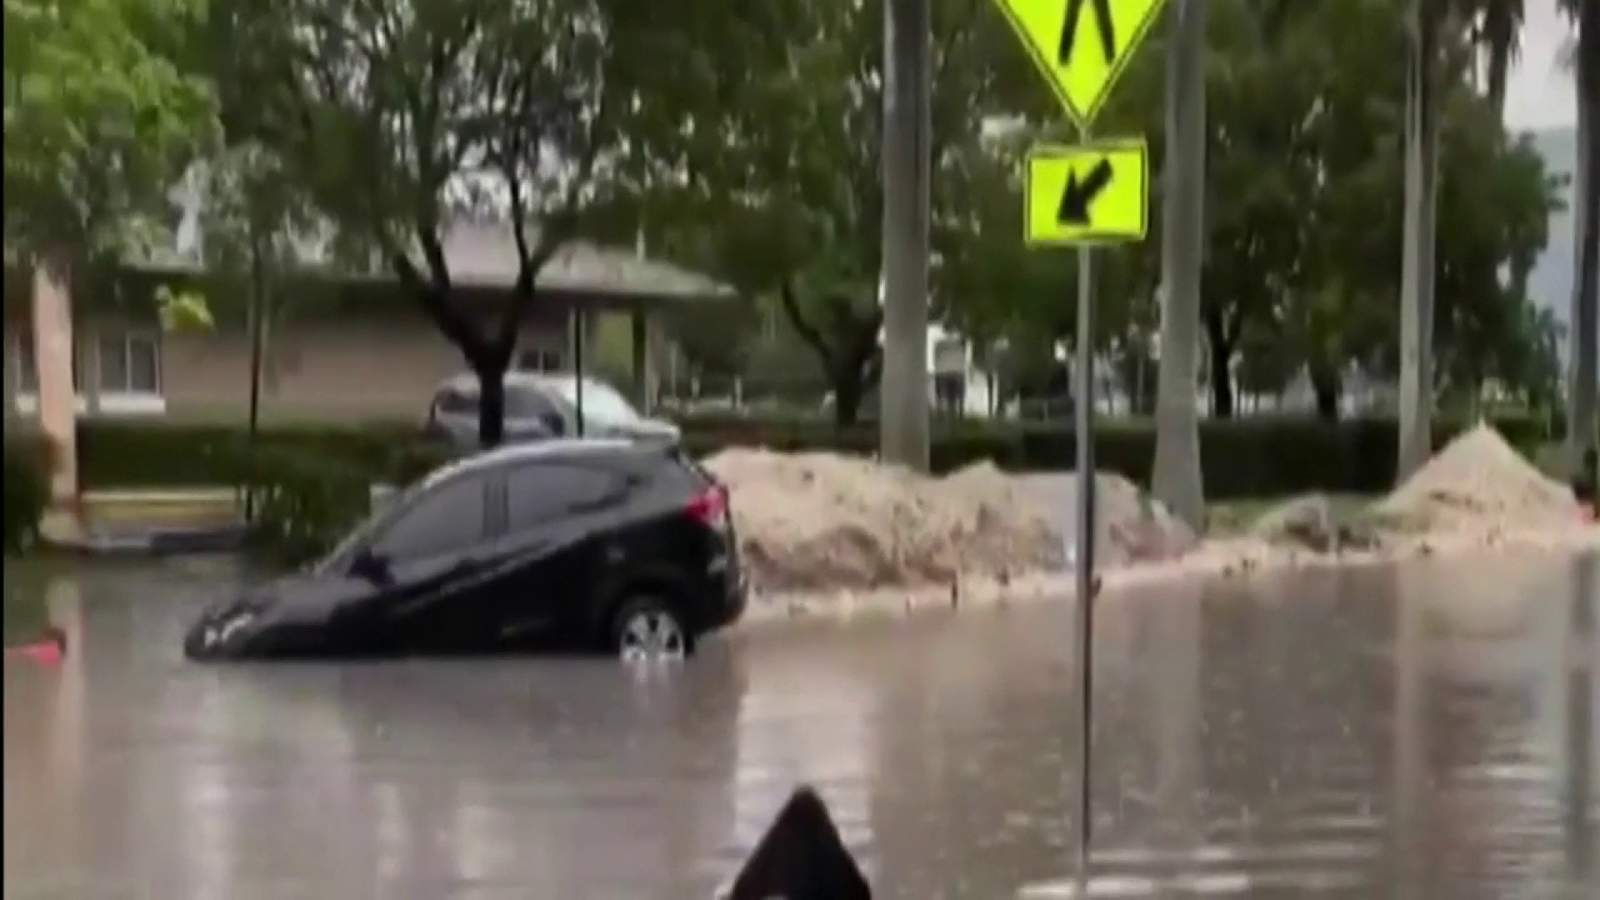 Heavy rainfall over last 72 hours causes flooding in Broward County